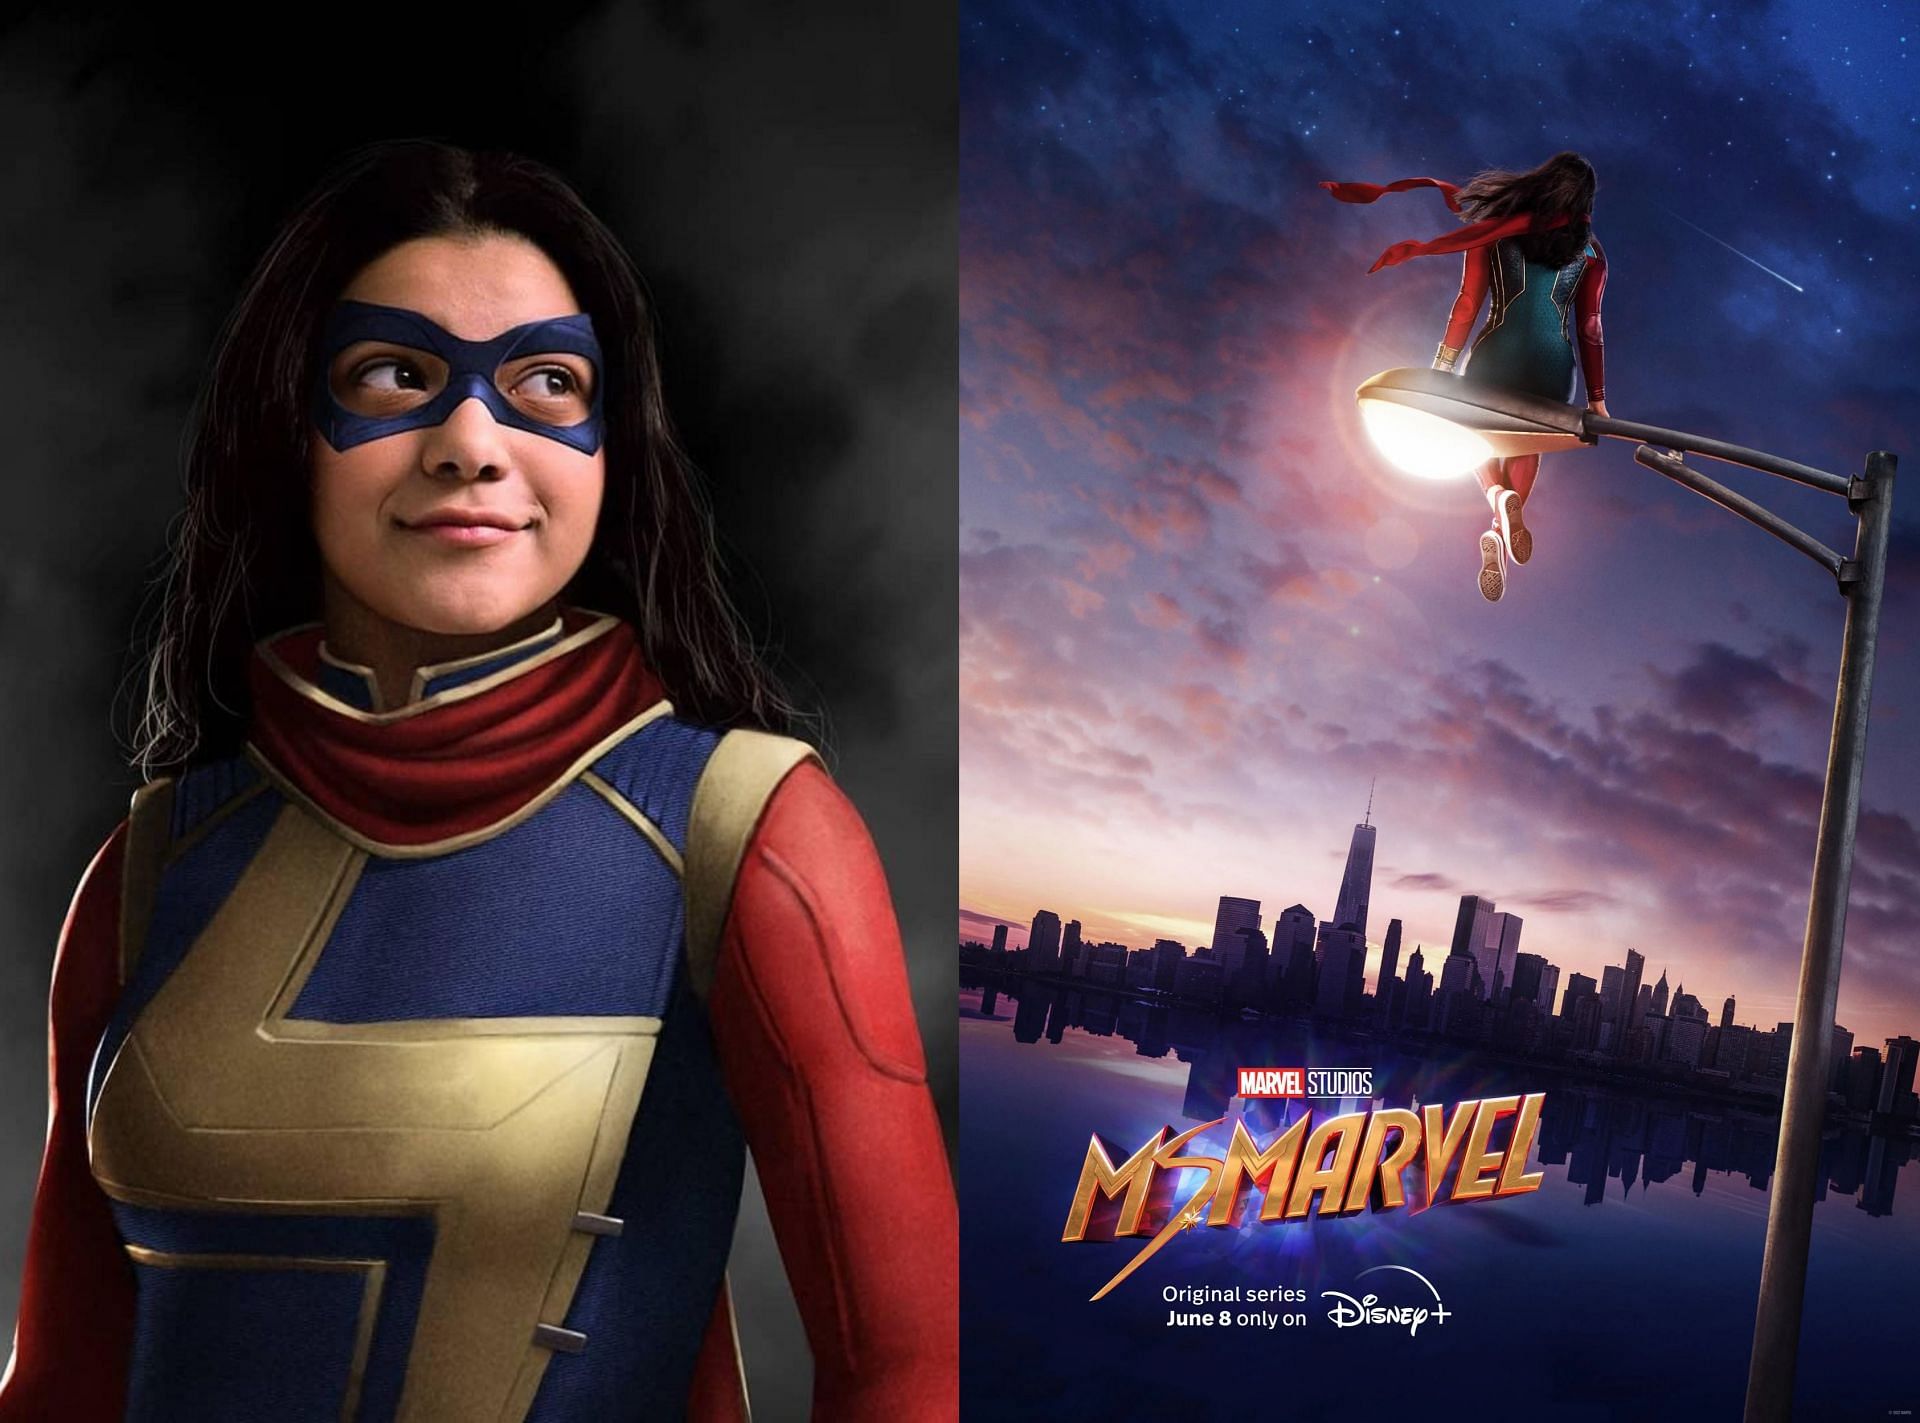 Ms. Marvel concept art and poster (Image via Jao Picart/Instagram, and Marvel Studios)